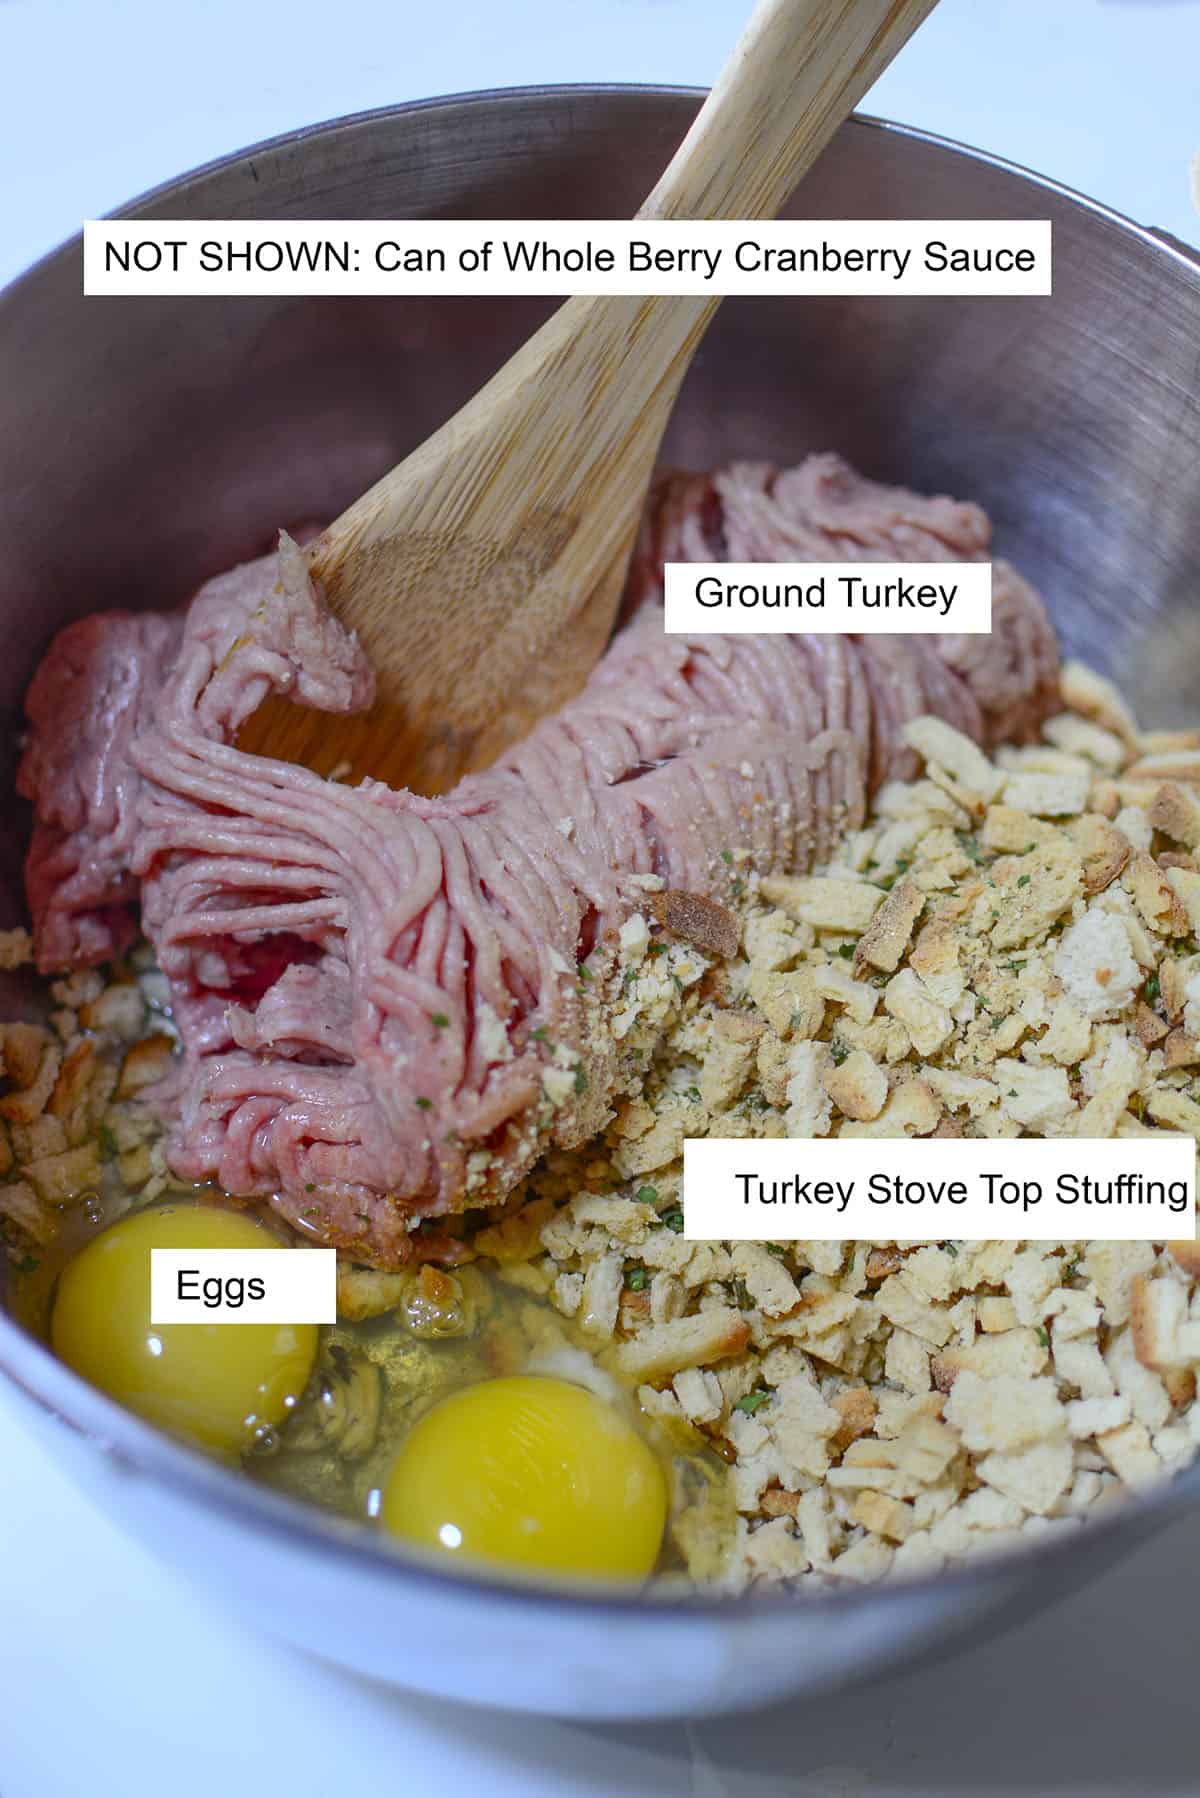 The ingredients to make the meatloaf featured in a bowl. Ground turkey, stove top stuffing and two eggs.